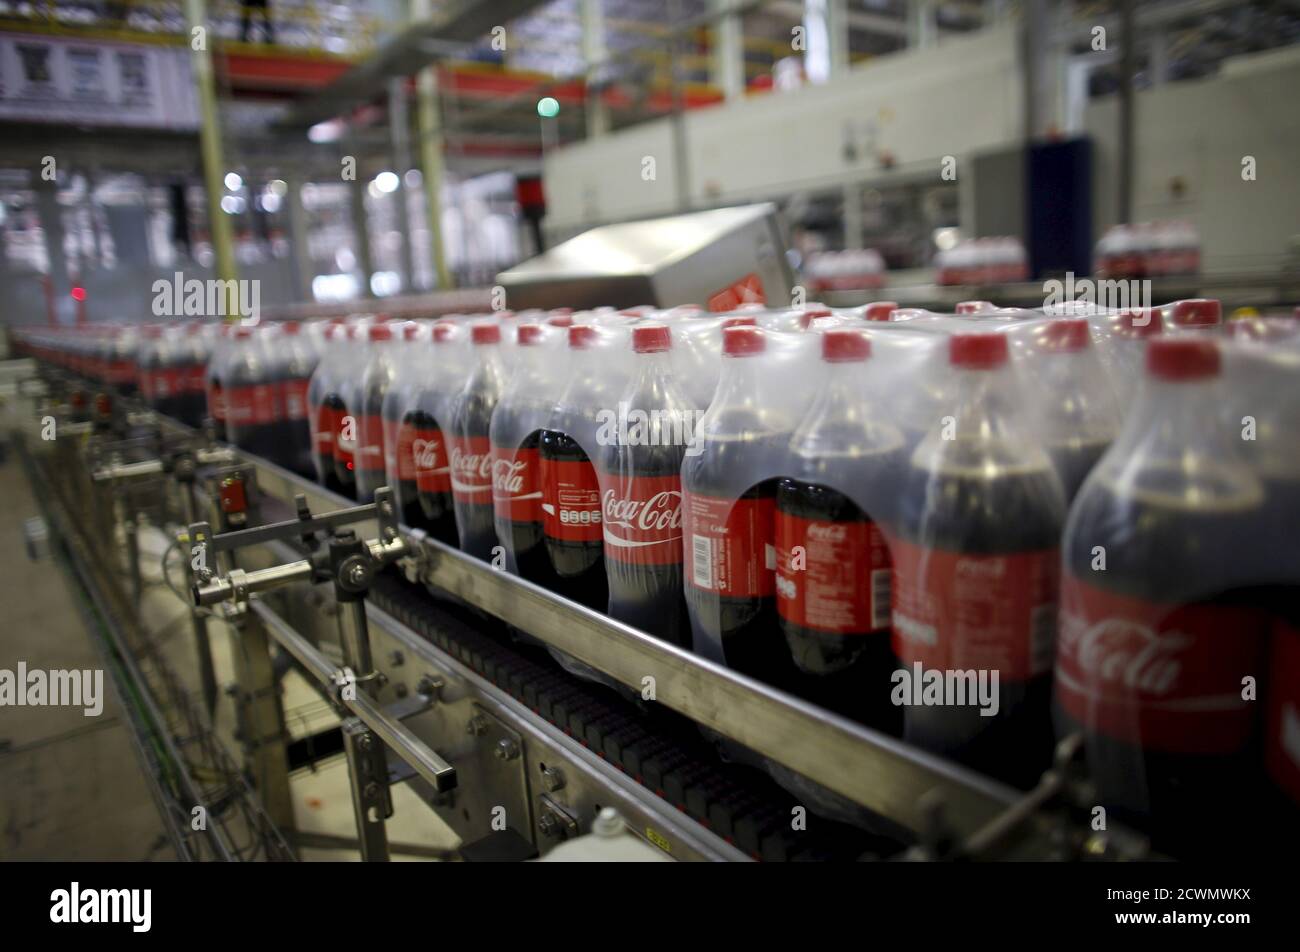 Bottles of Coca-Cola are pictured on a newly inaugurated production line at the Cikedokan Plant in Bekasi, West Java near Jakarta March 31, 2015. The Coca-Cola company inaugurated two new production lines as part of an investment package worth some $500 million to accelerate growth in the Indonesian market. REUTERS/Darren Whiteside Stock Photo